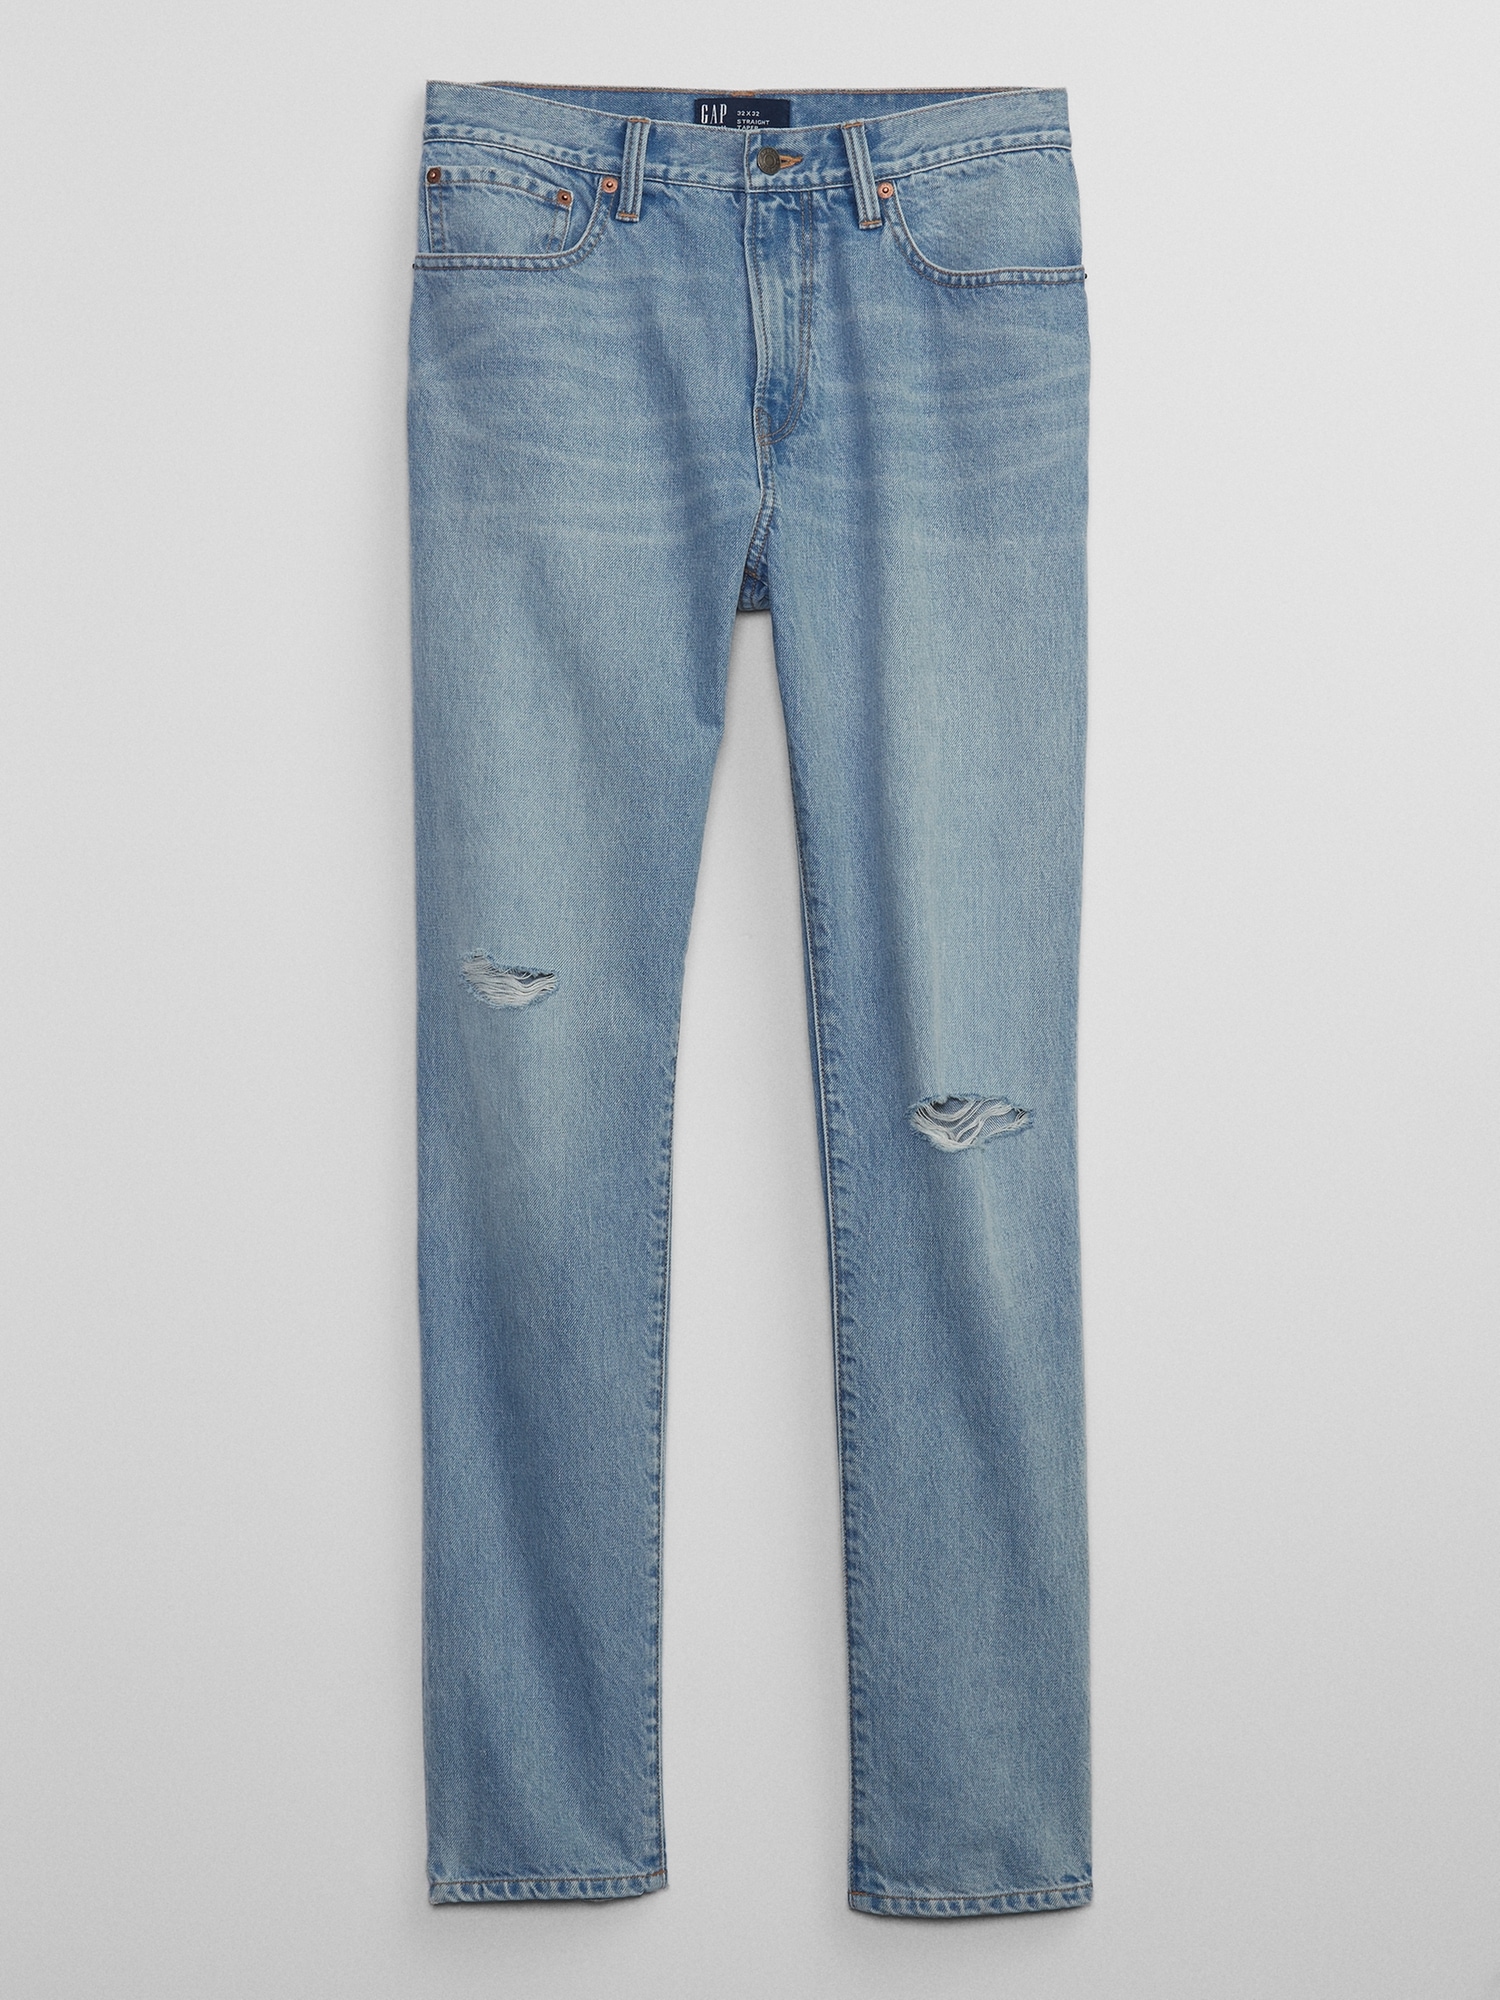 Destructed Straight Taper Jeans | Gap Factory